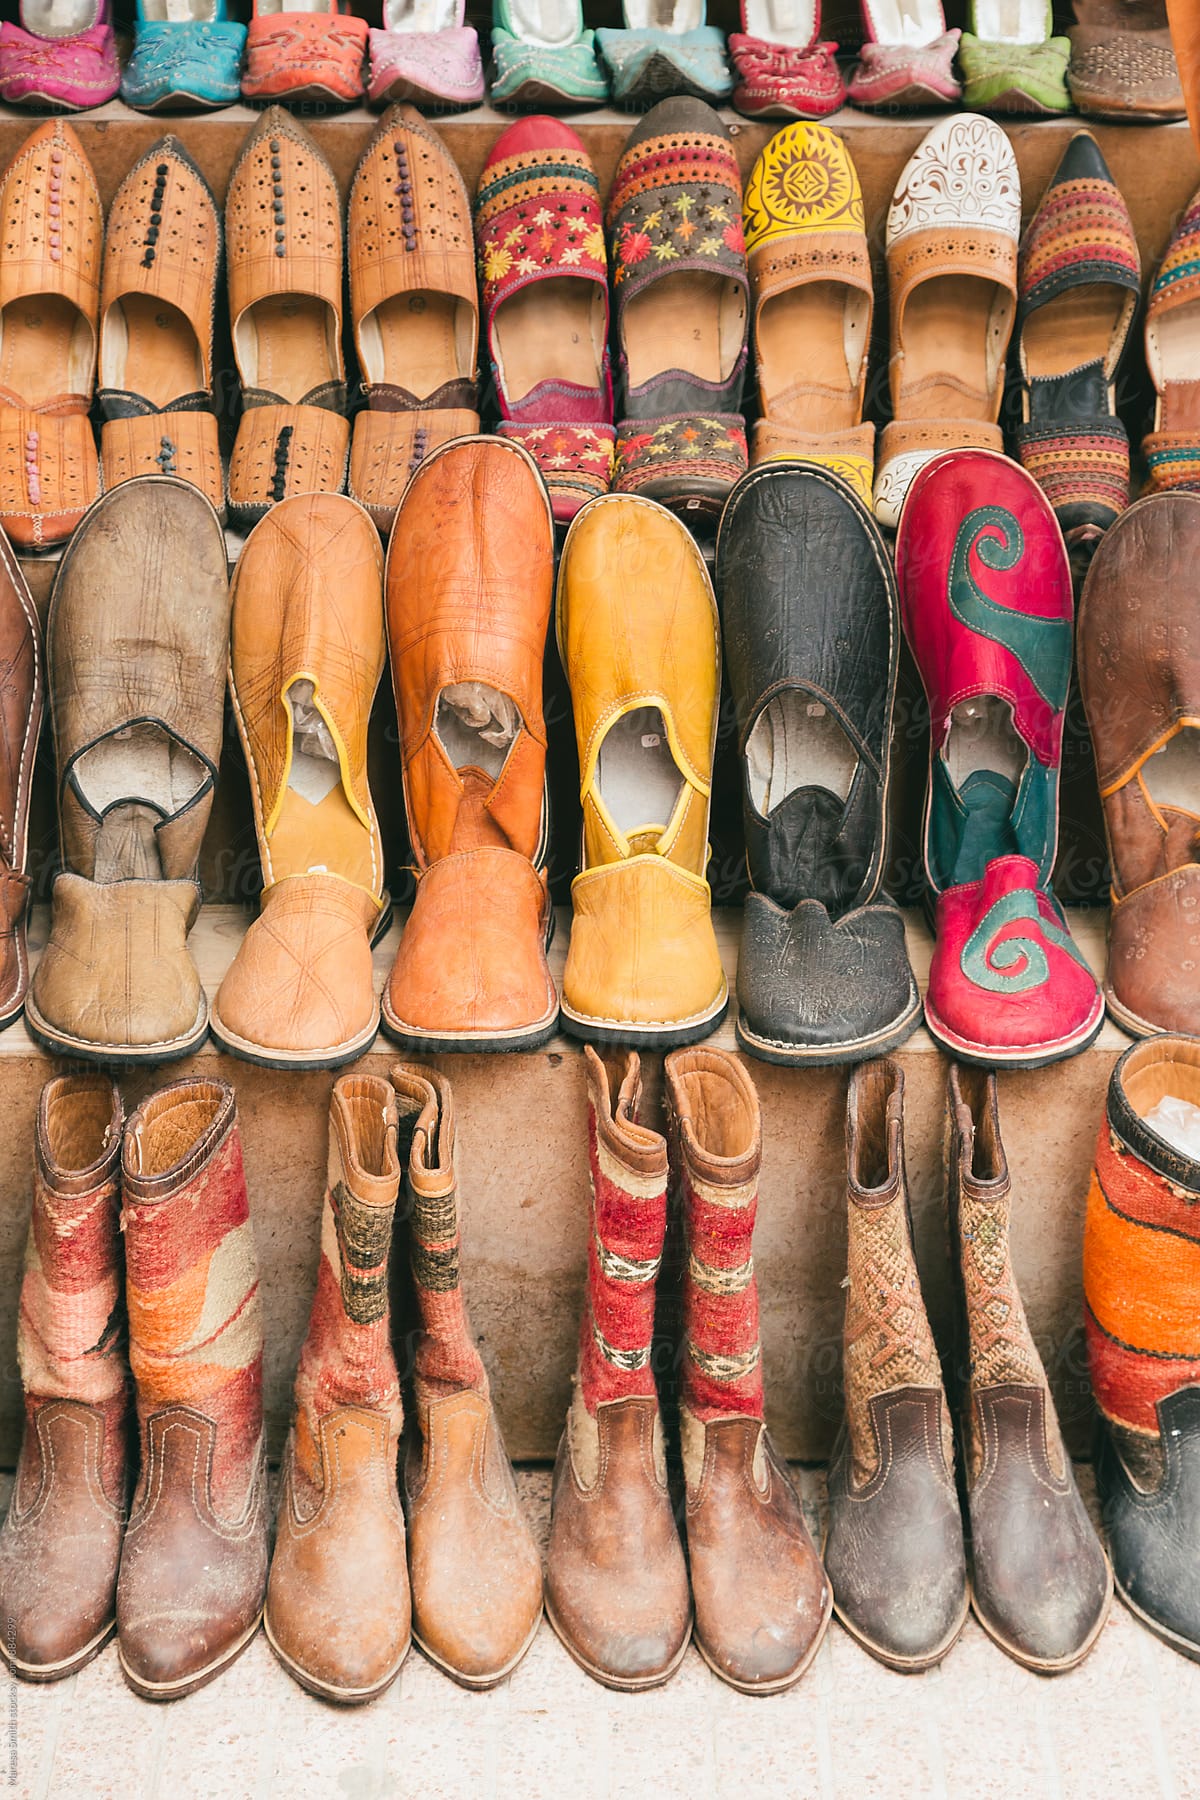 Moroccan slippers and boots stacked up at a market stall in Essaouira